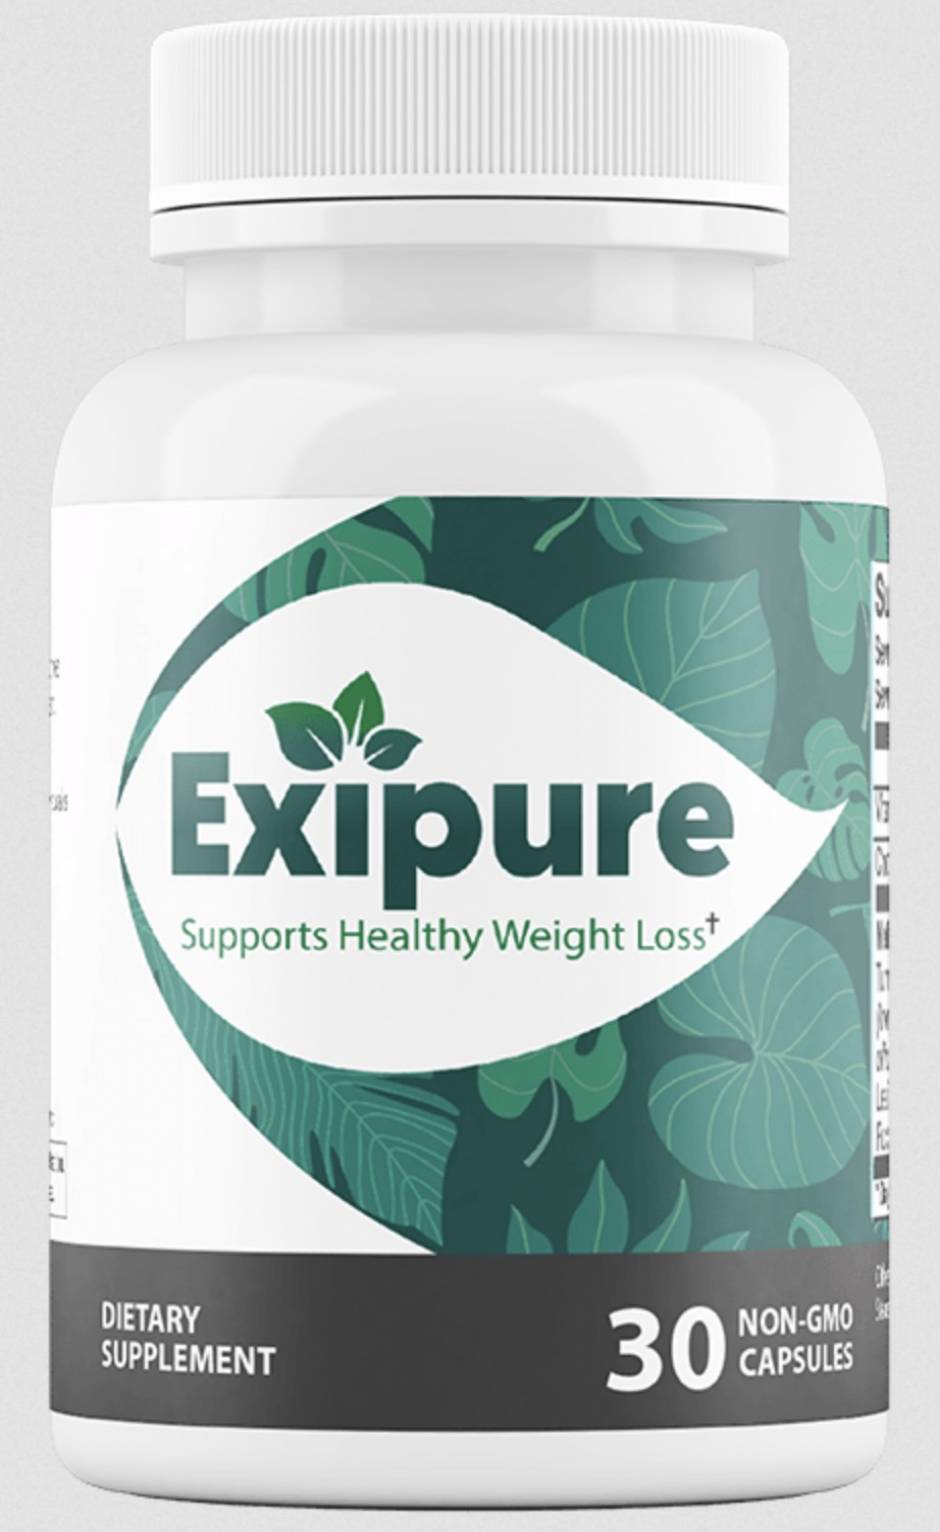 Exipure Capsules For Weight Loss